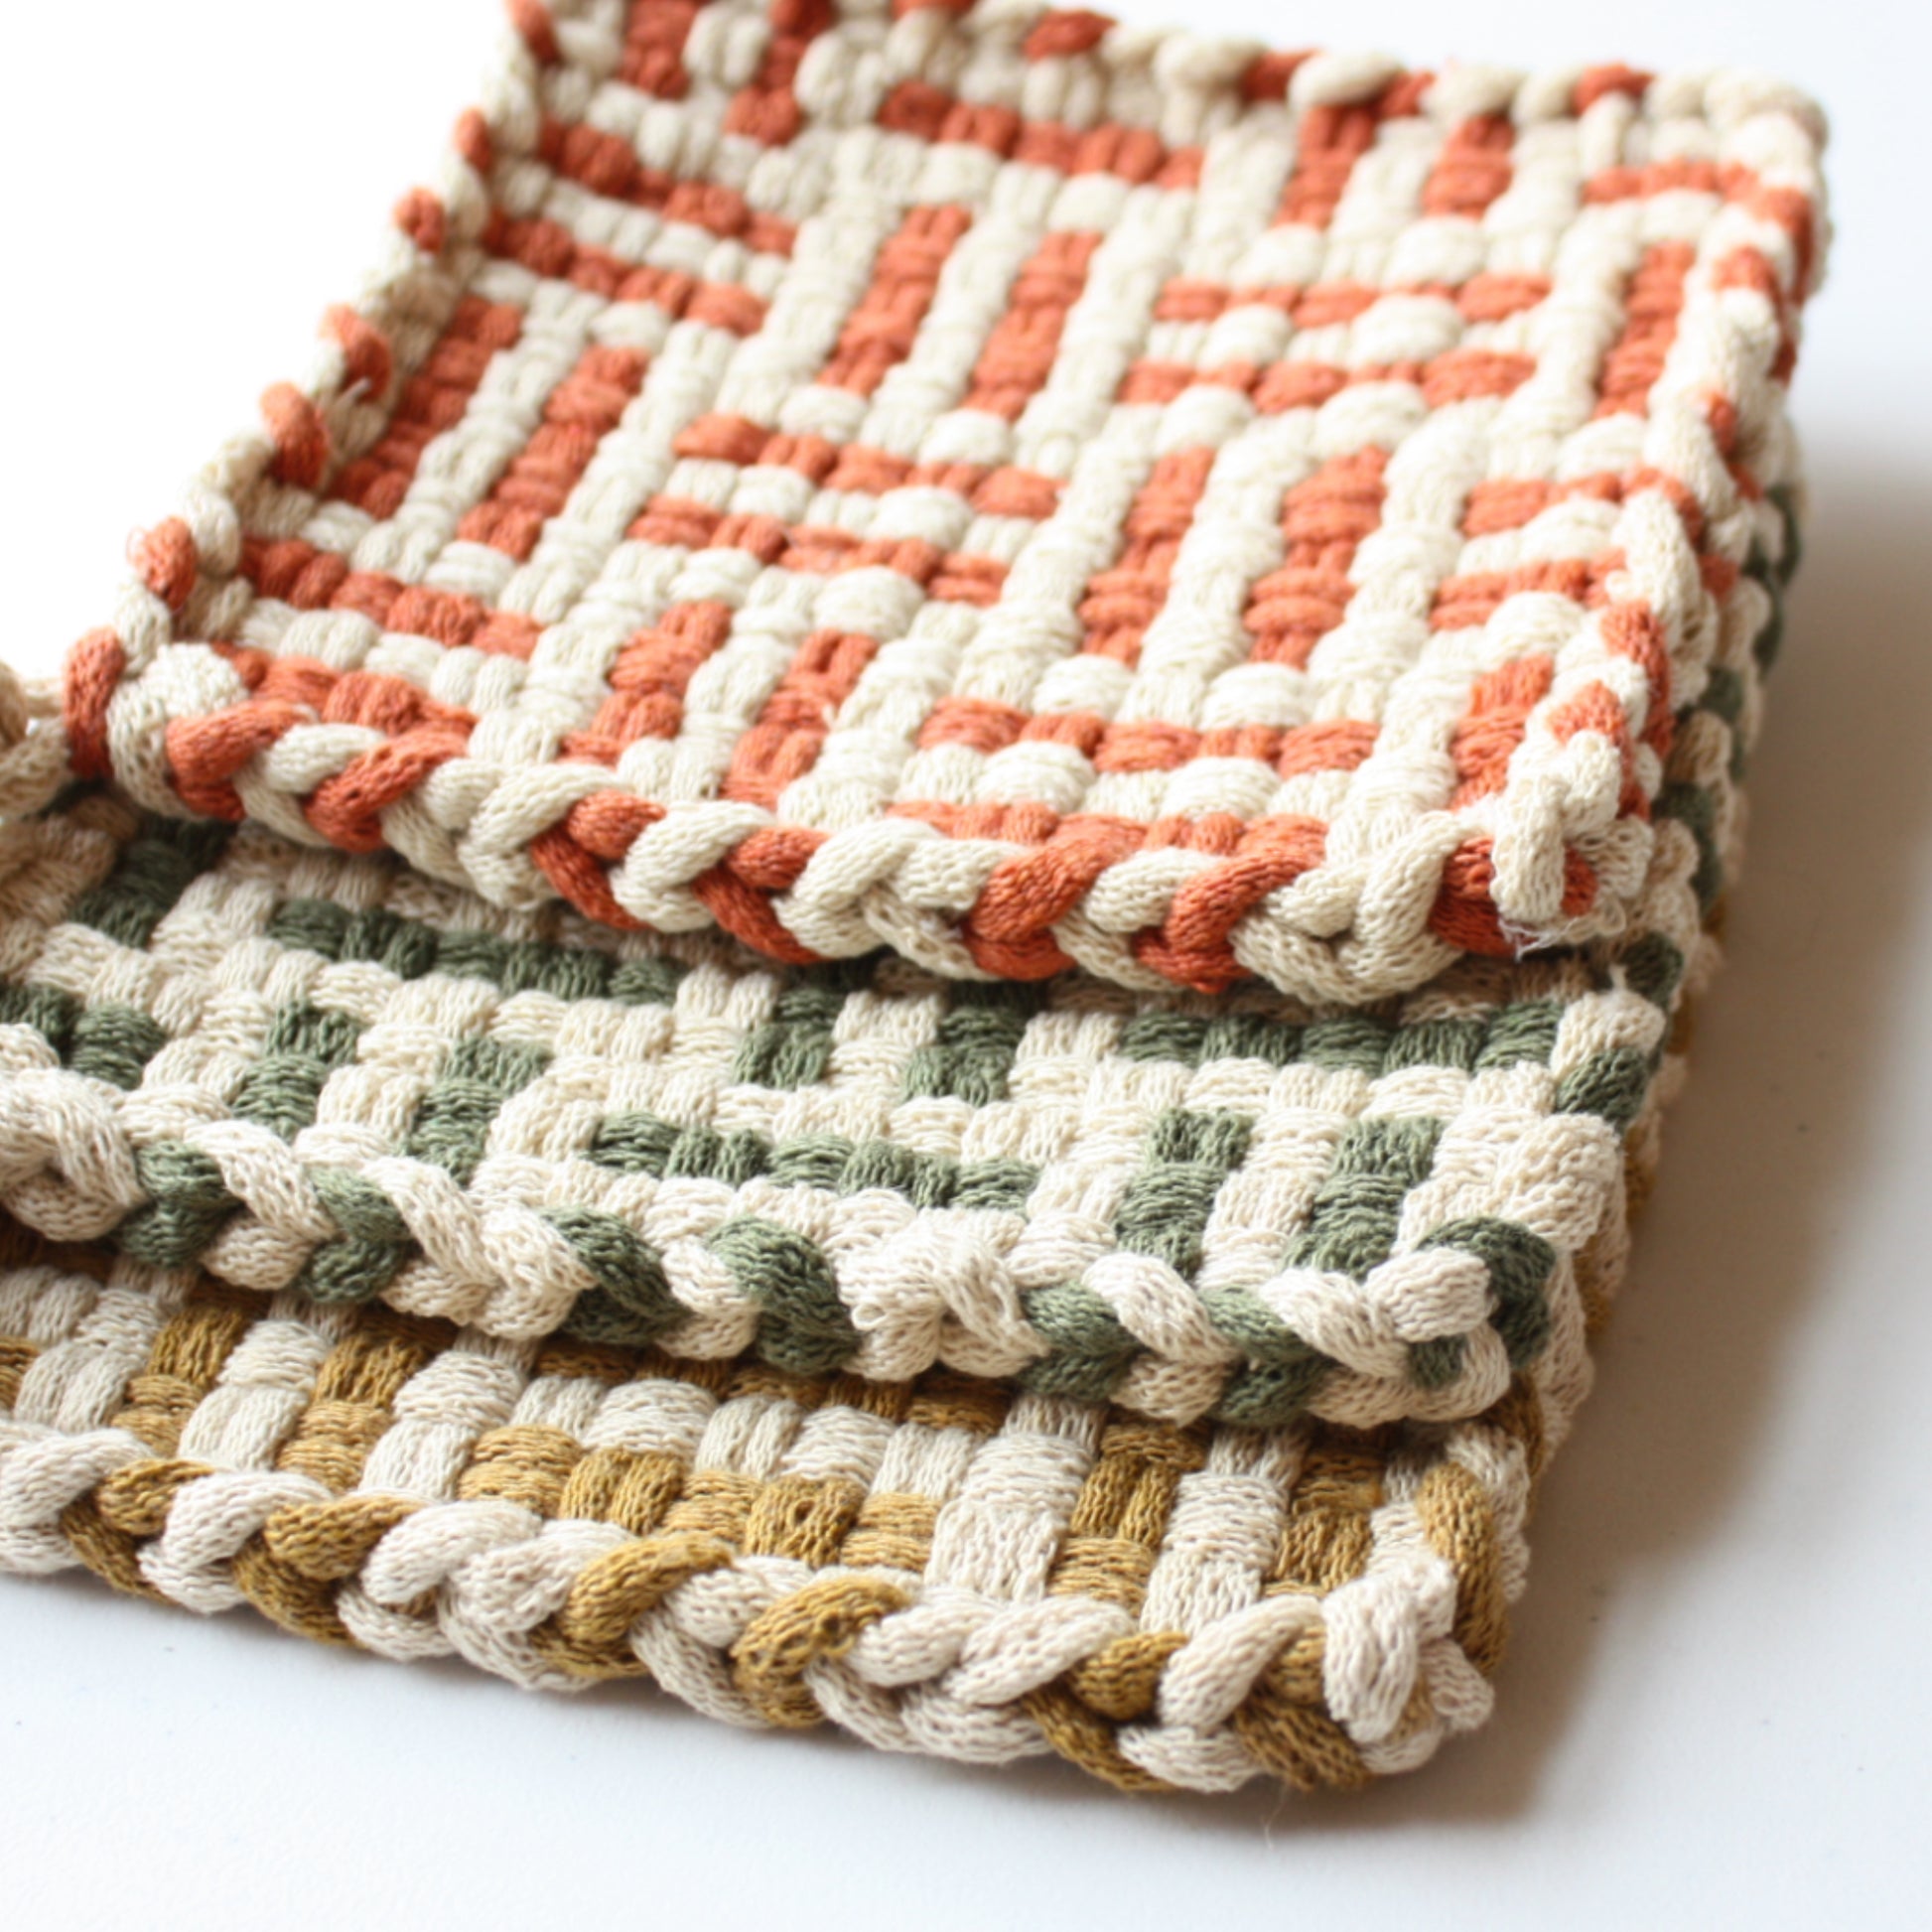 Cotton Handwoven Potholders - Made in the USA